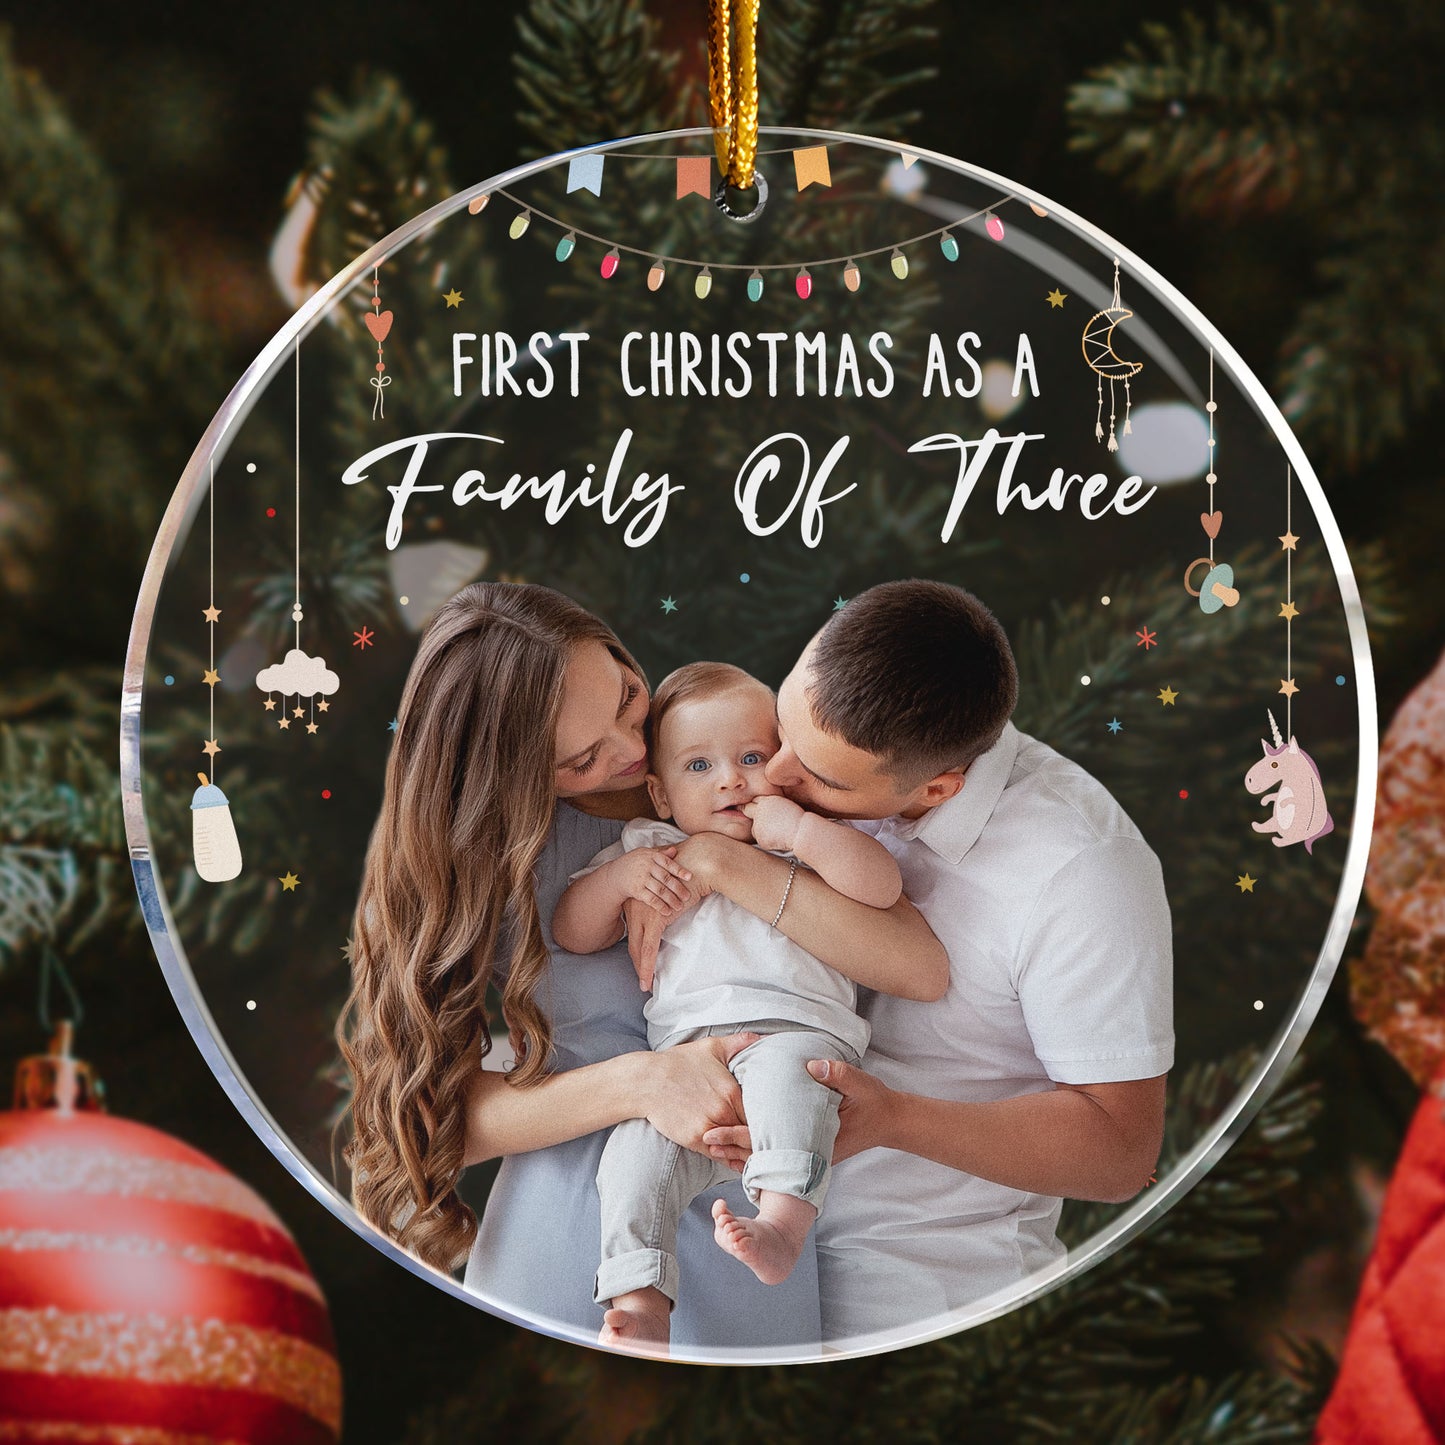 Baby First Christmas As A Family Of Three - Personalized Photo Acrylic Ornament